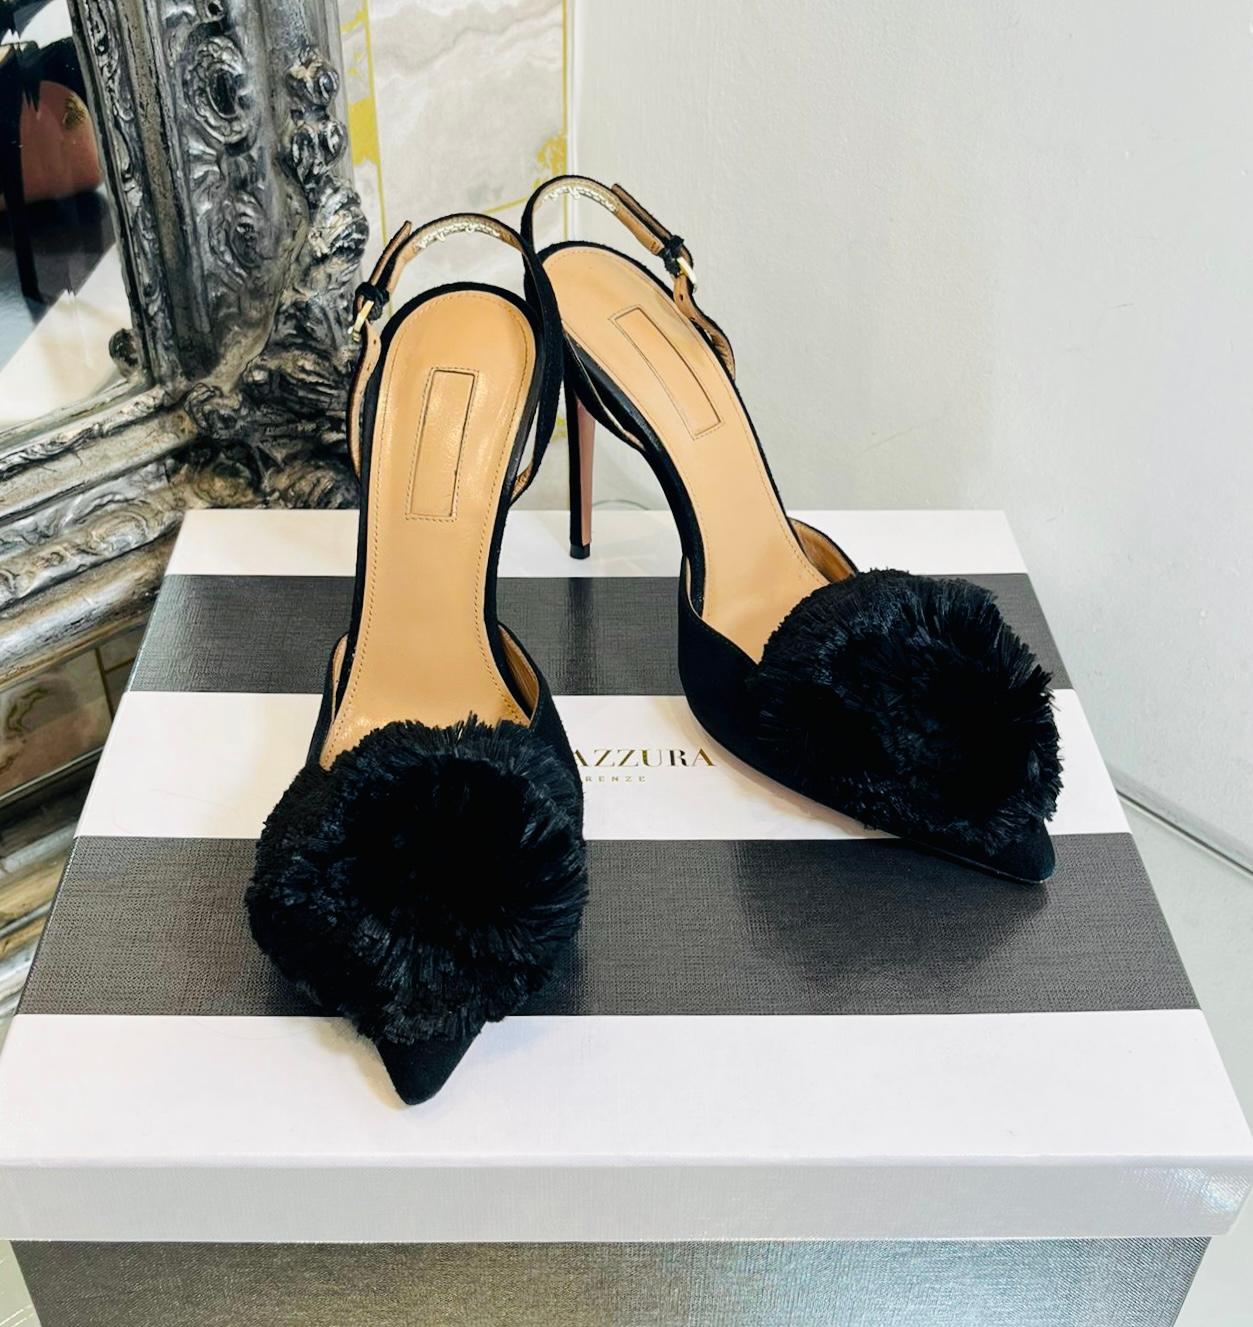 Aquazzura Powder Puff Suede Pumps

Black heels designed with the brand's signature oversized, tonal pompom at the vamp.

Featuring pointed toe, stiletto heel and sling-back style. Rrp £655

Size – 37

Condition – Very Good

Composition –